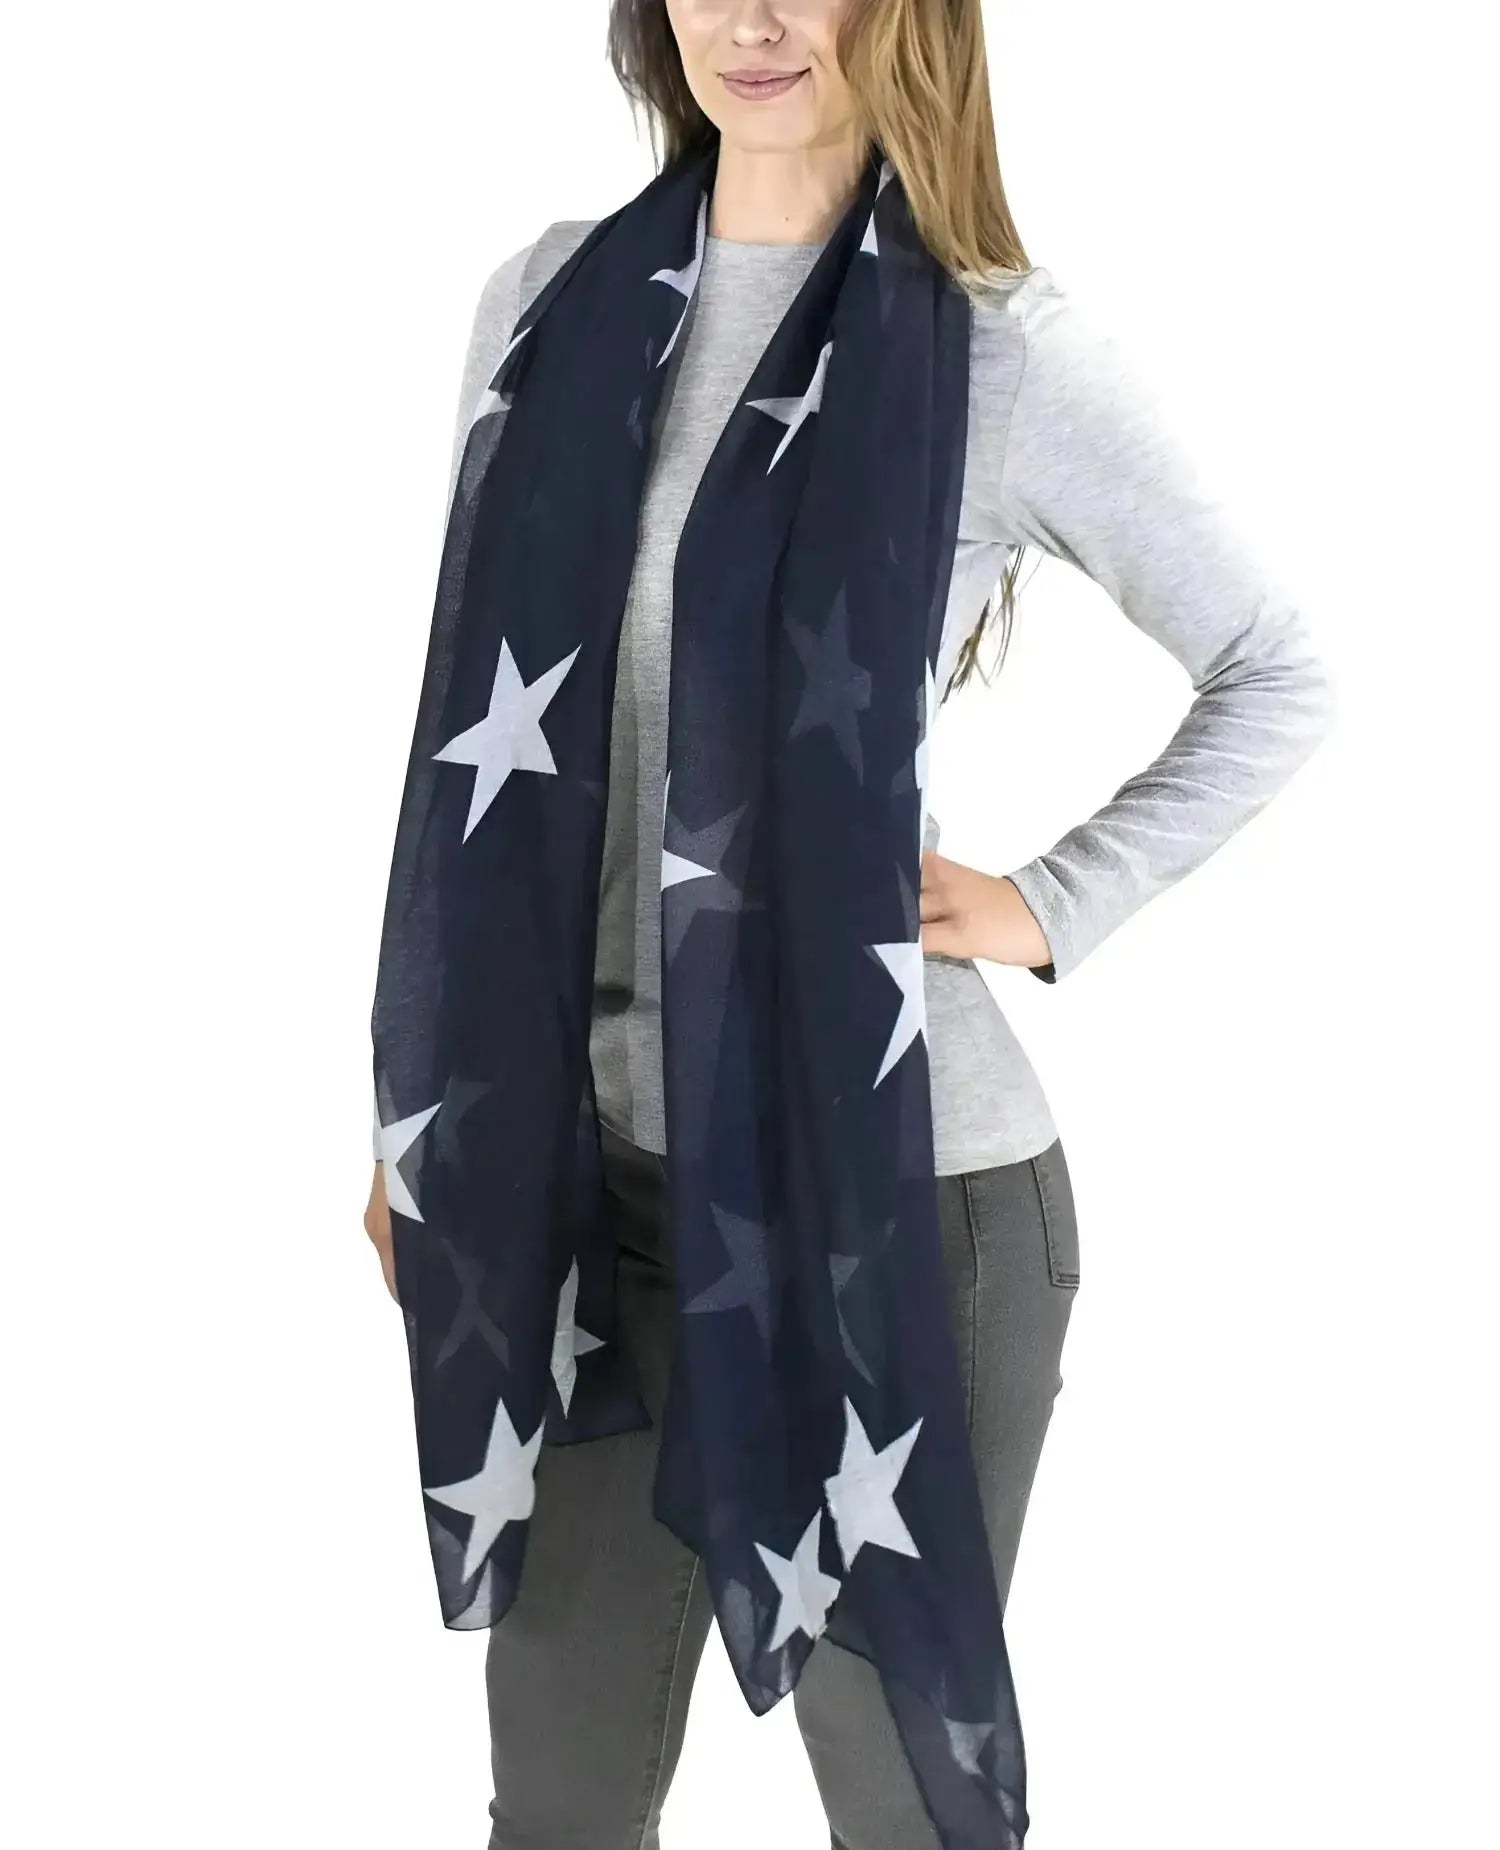 Retro star oversized scarf with navy and white star pattern